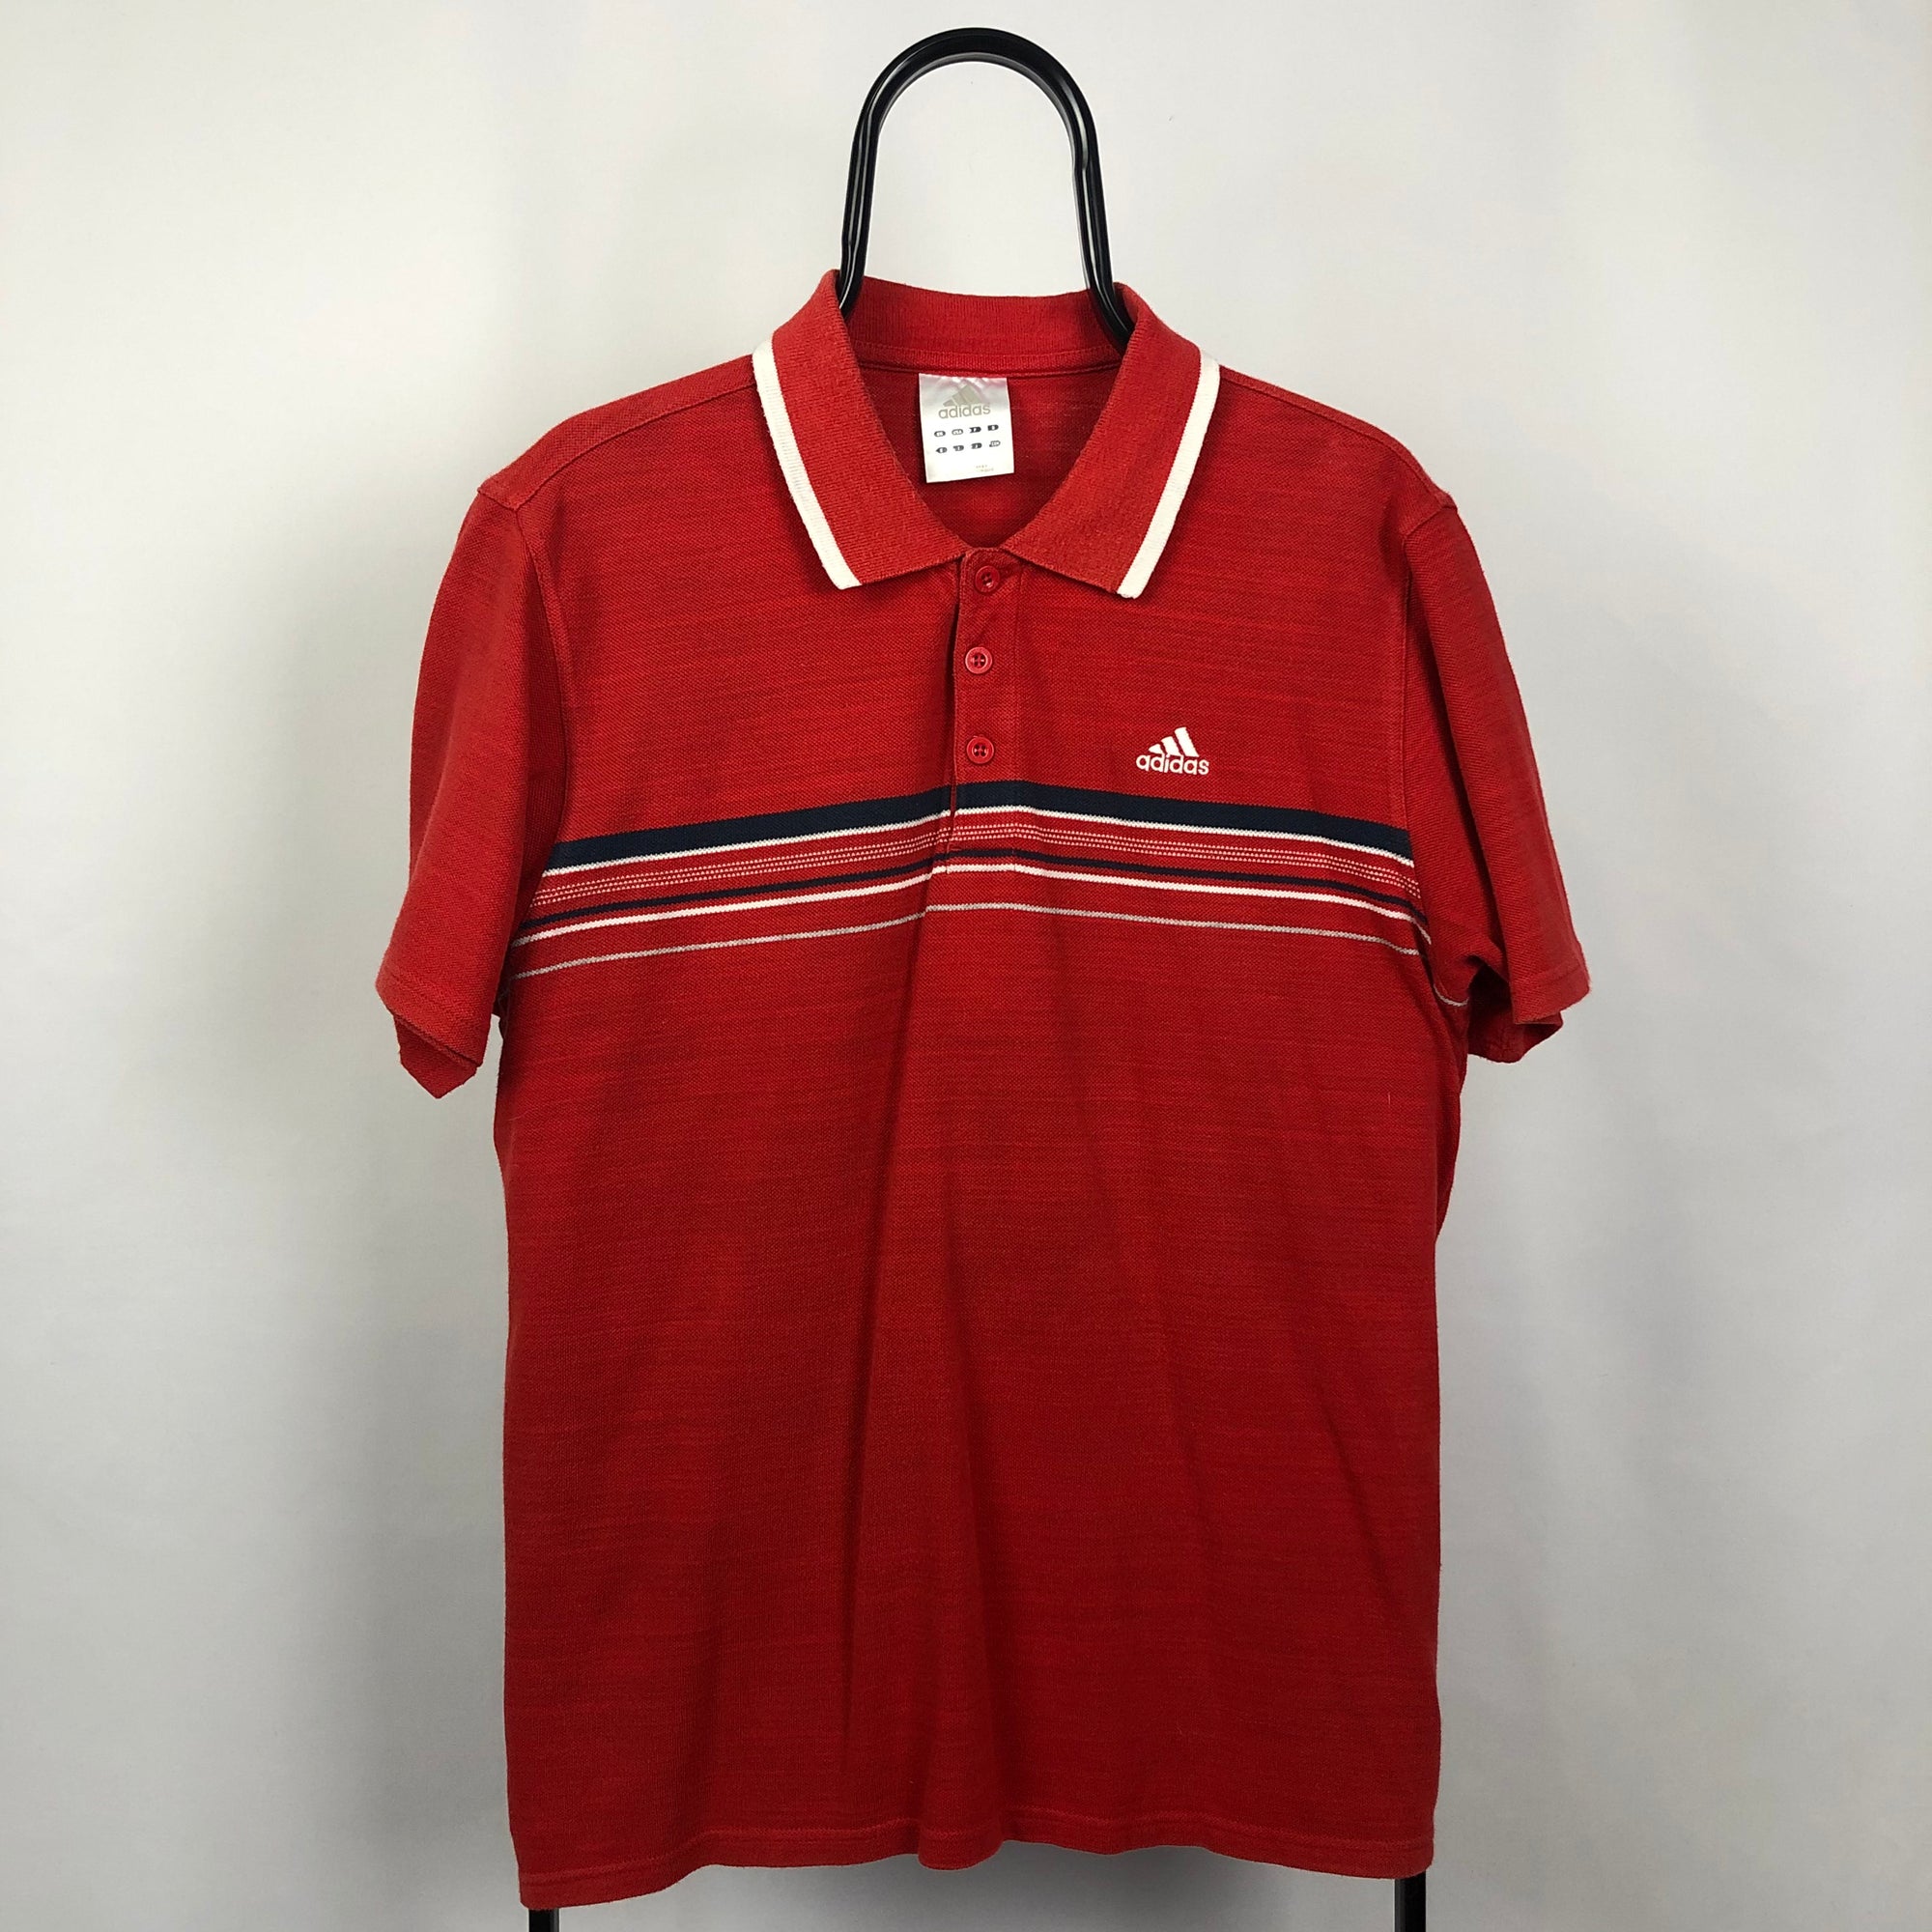 Adidas Polo Shirt in Red - Men's Large/Women's XL